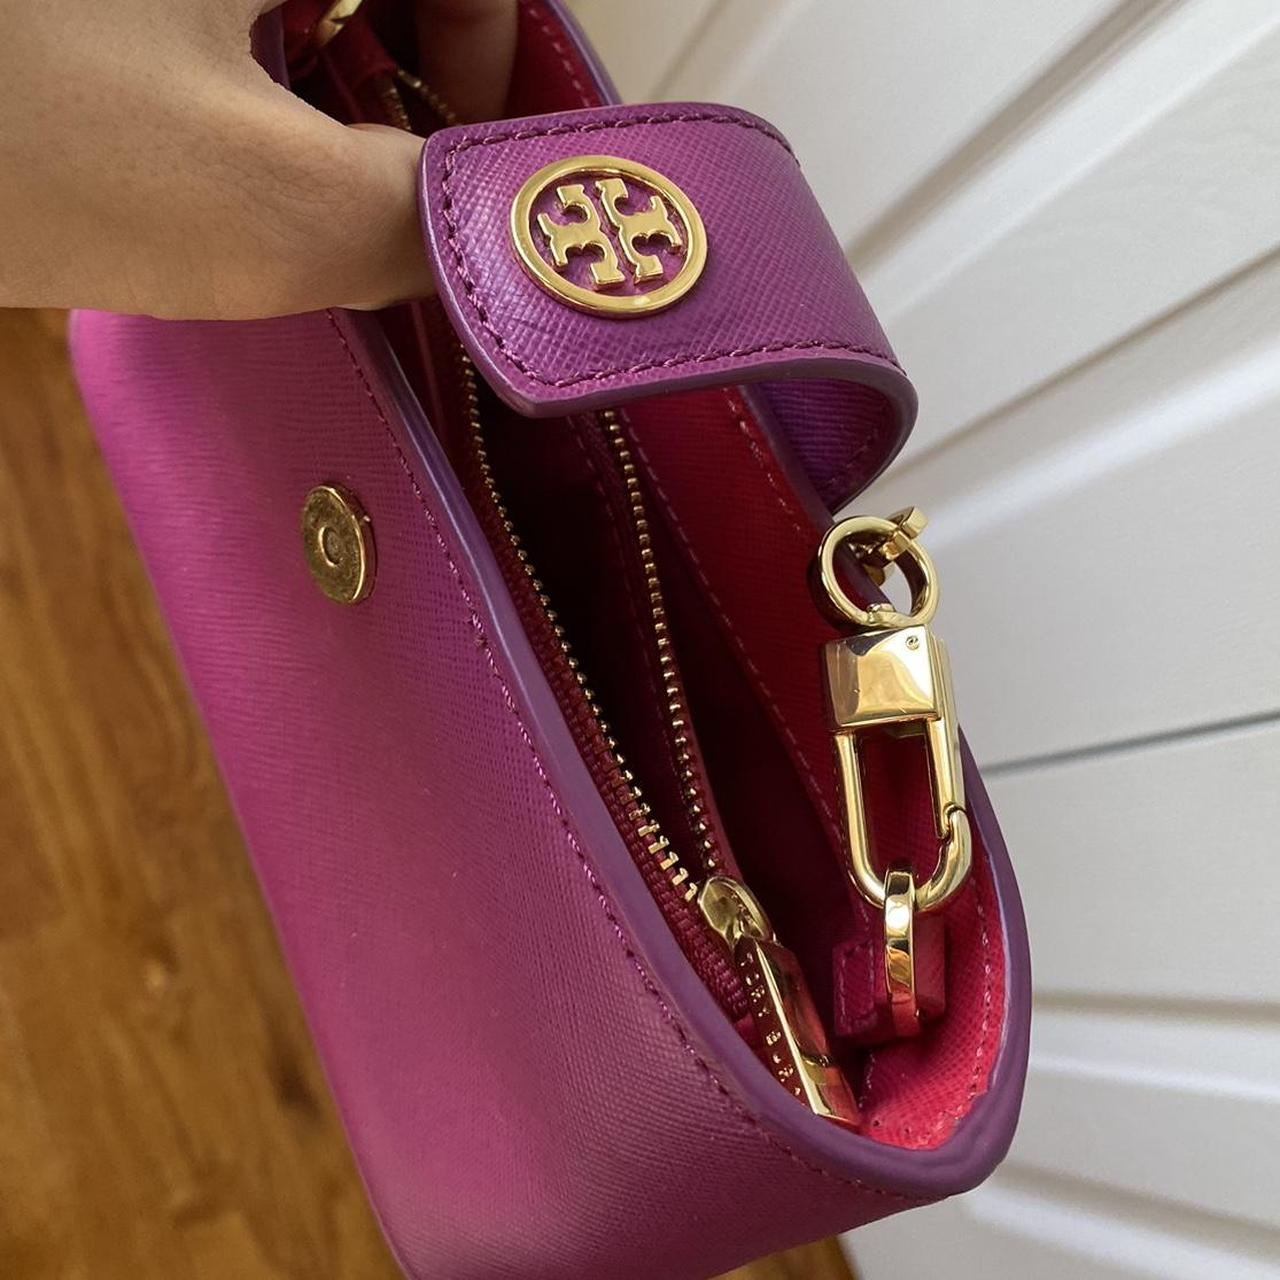 TORY BURCH Suede Chain Shoulder Bag Green and Purple | eBay